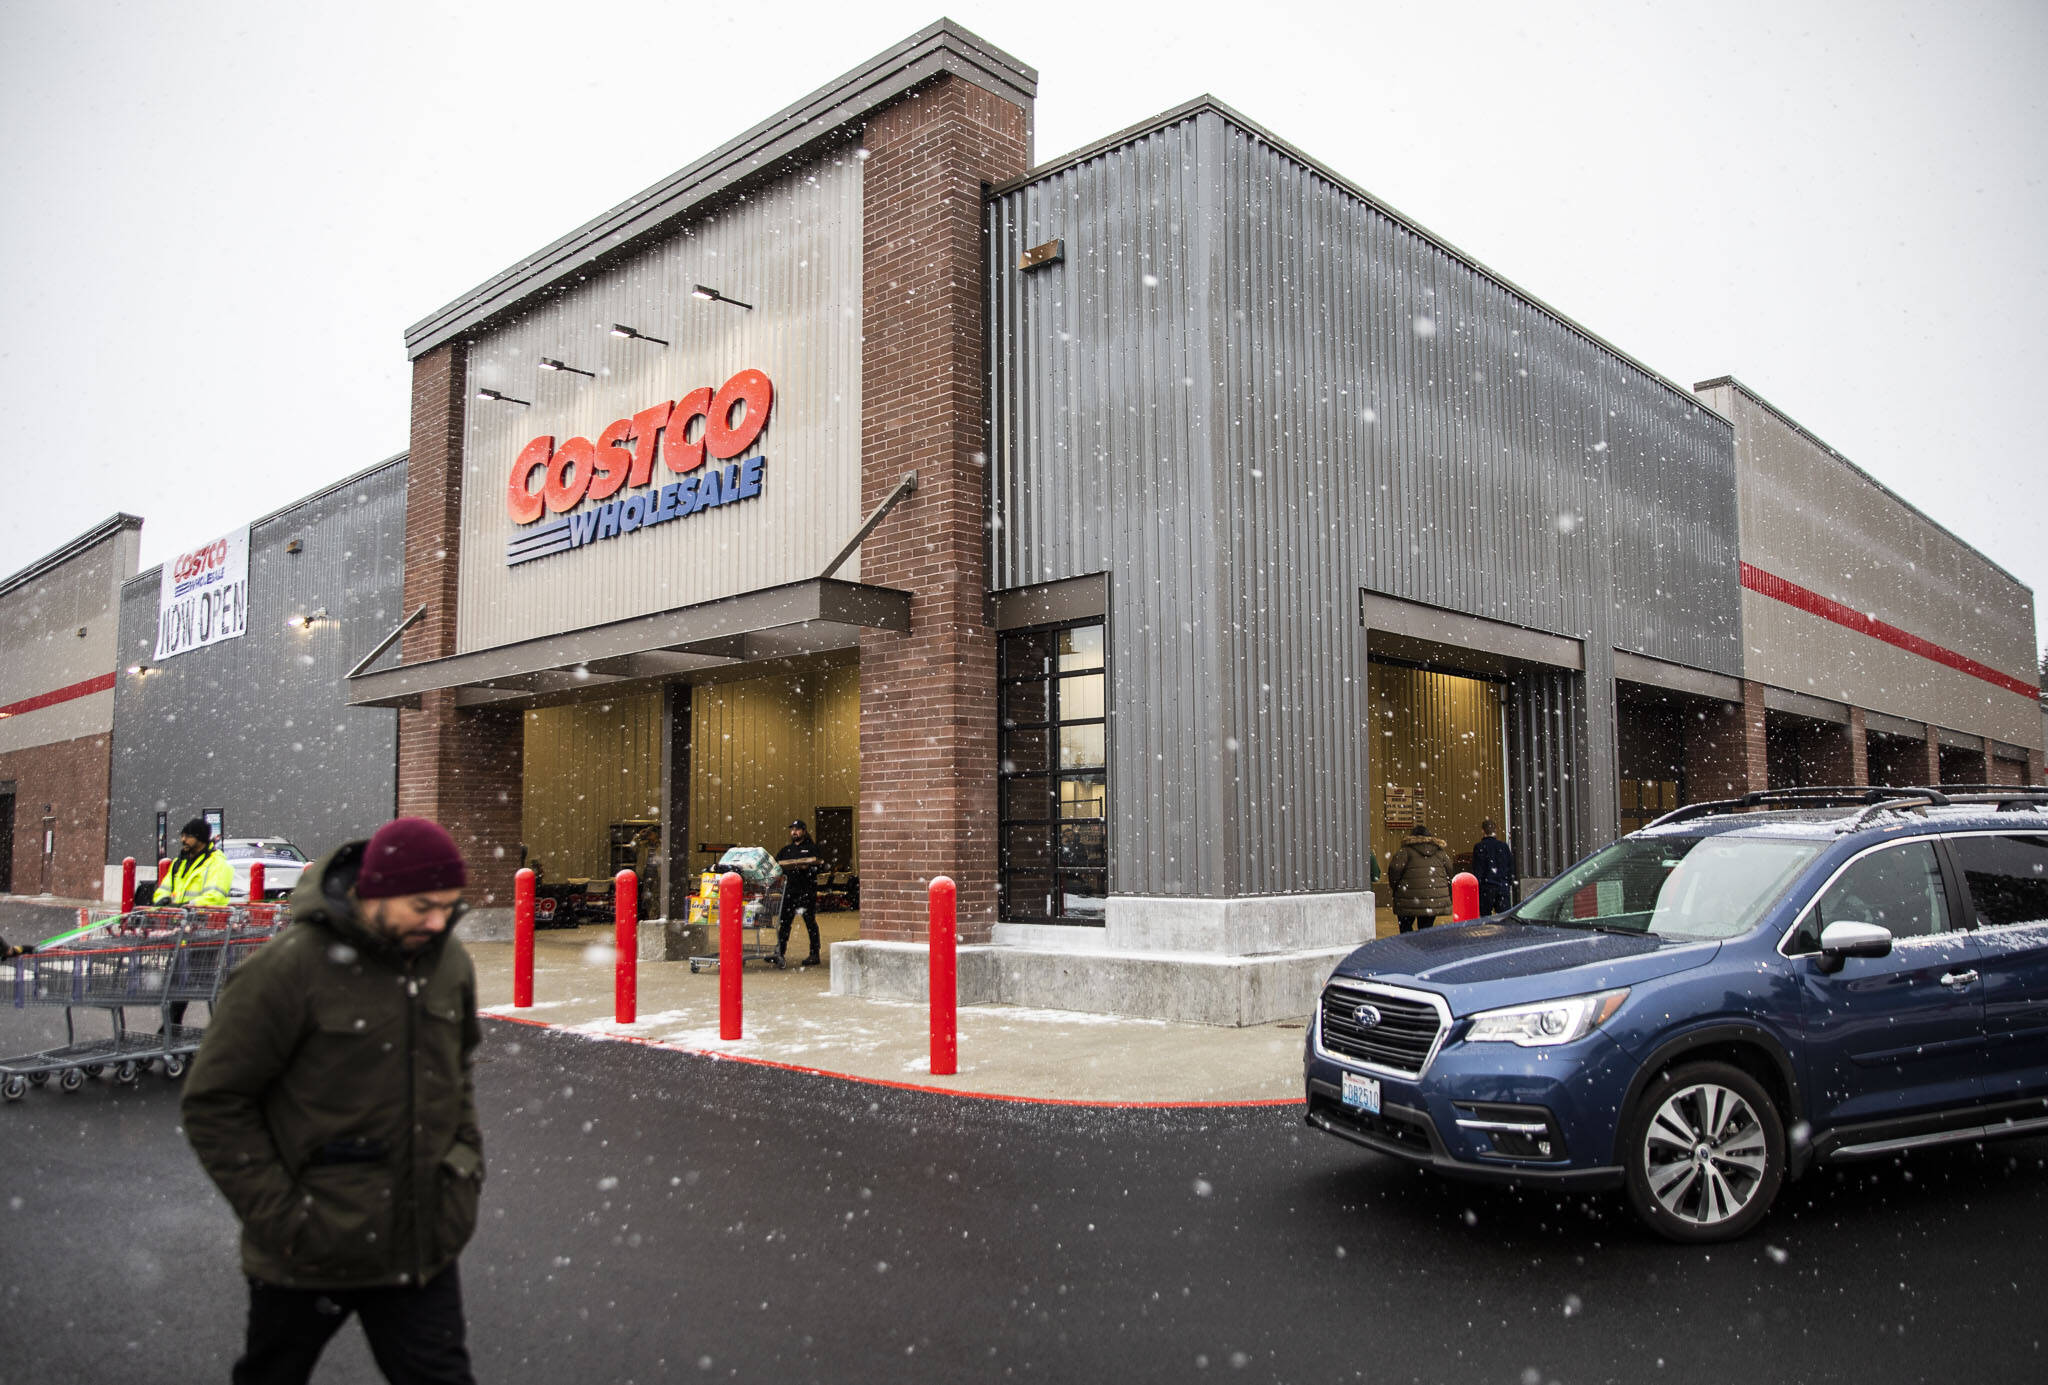 Costco’s Lake Stevens store opened Friday after years of delays and protests. (Olivia Vanni / The Herald)